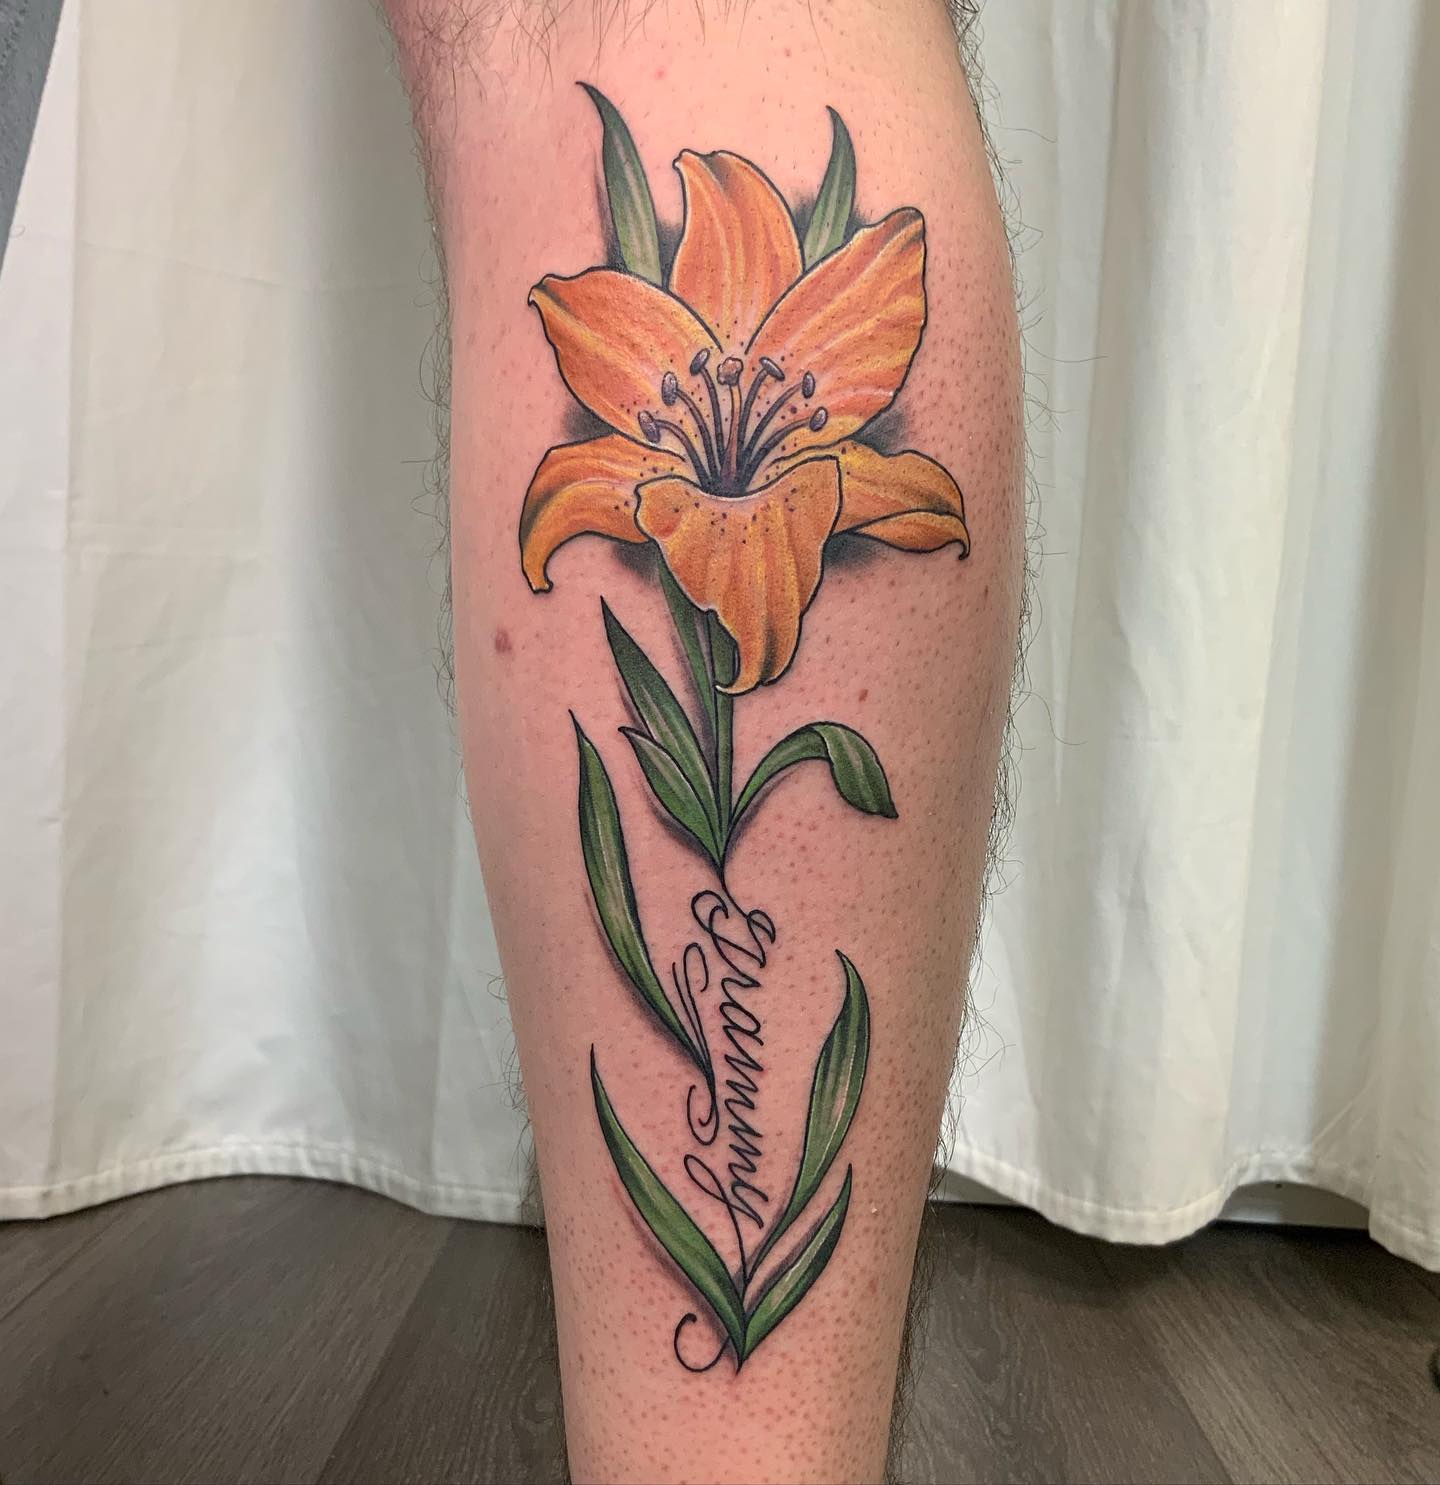 Orange lily tattoos rock! Orange lily is a symbol of hope, faith and new beginnings. It is worn by people who have been through a lot of change in their lives or who have just started off on a new journey